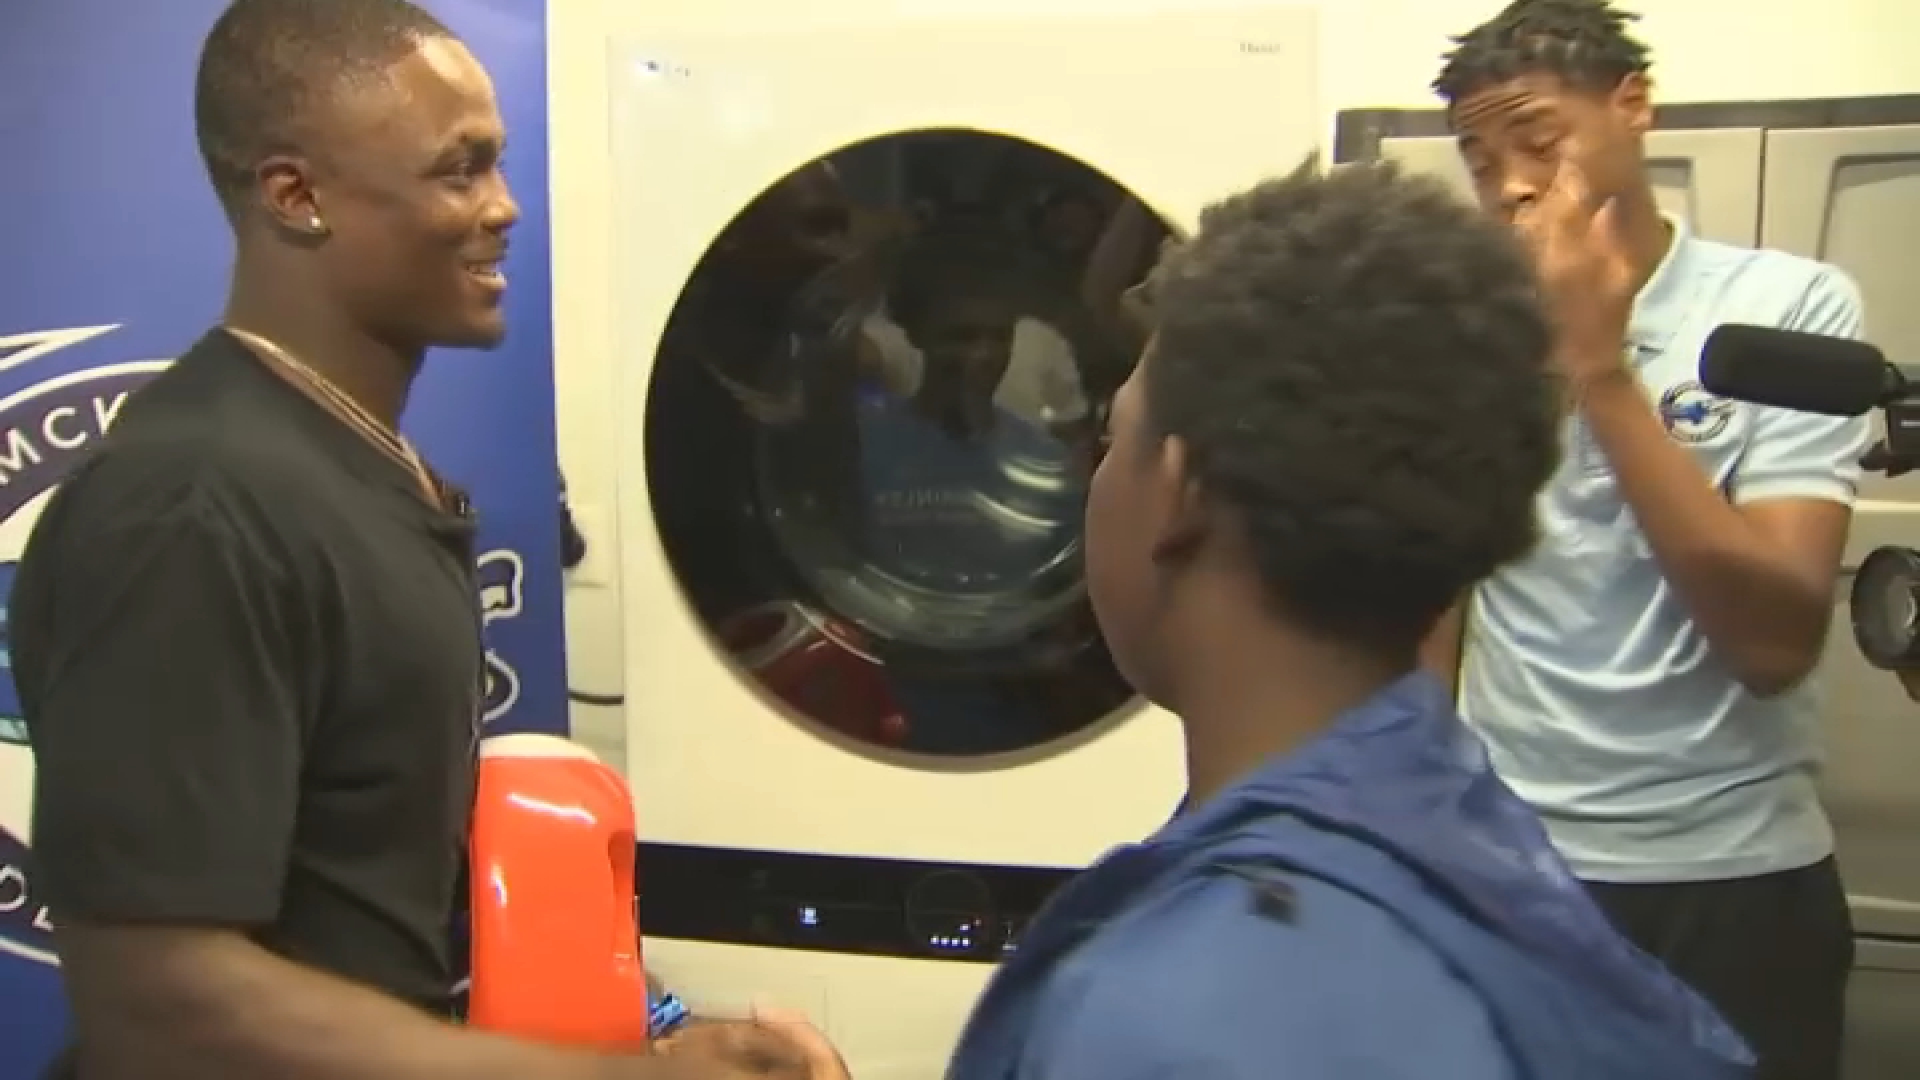 A locker of love: Washington Commanders' Terry McLaurin launches charity in DC